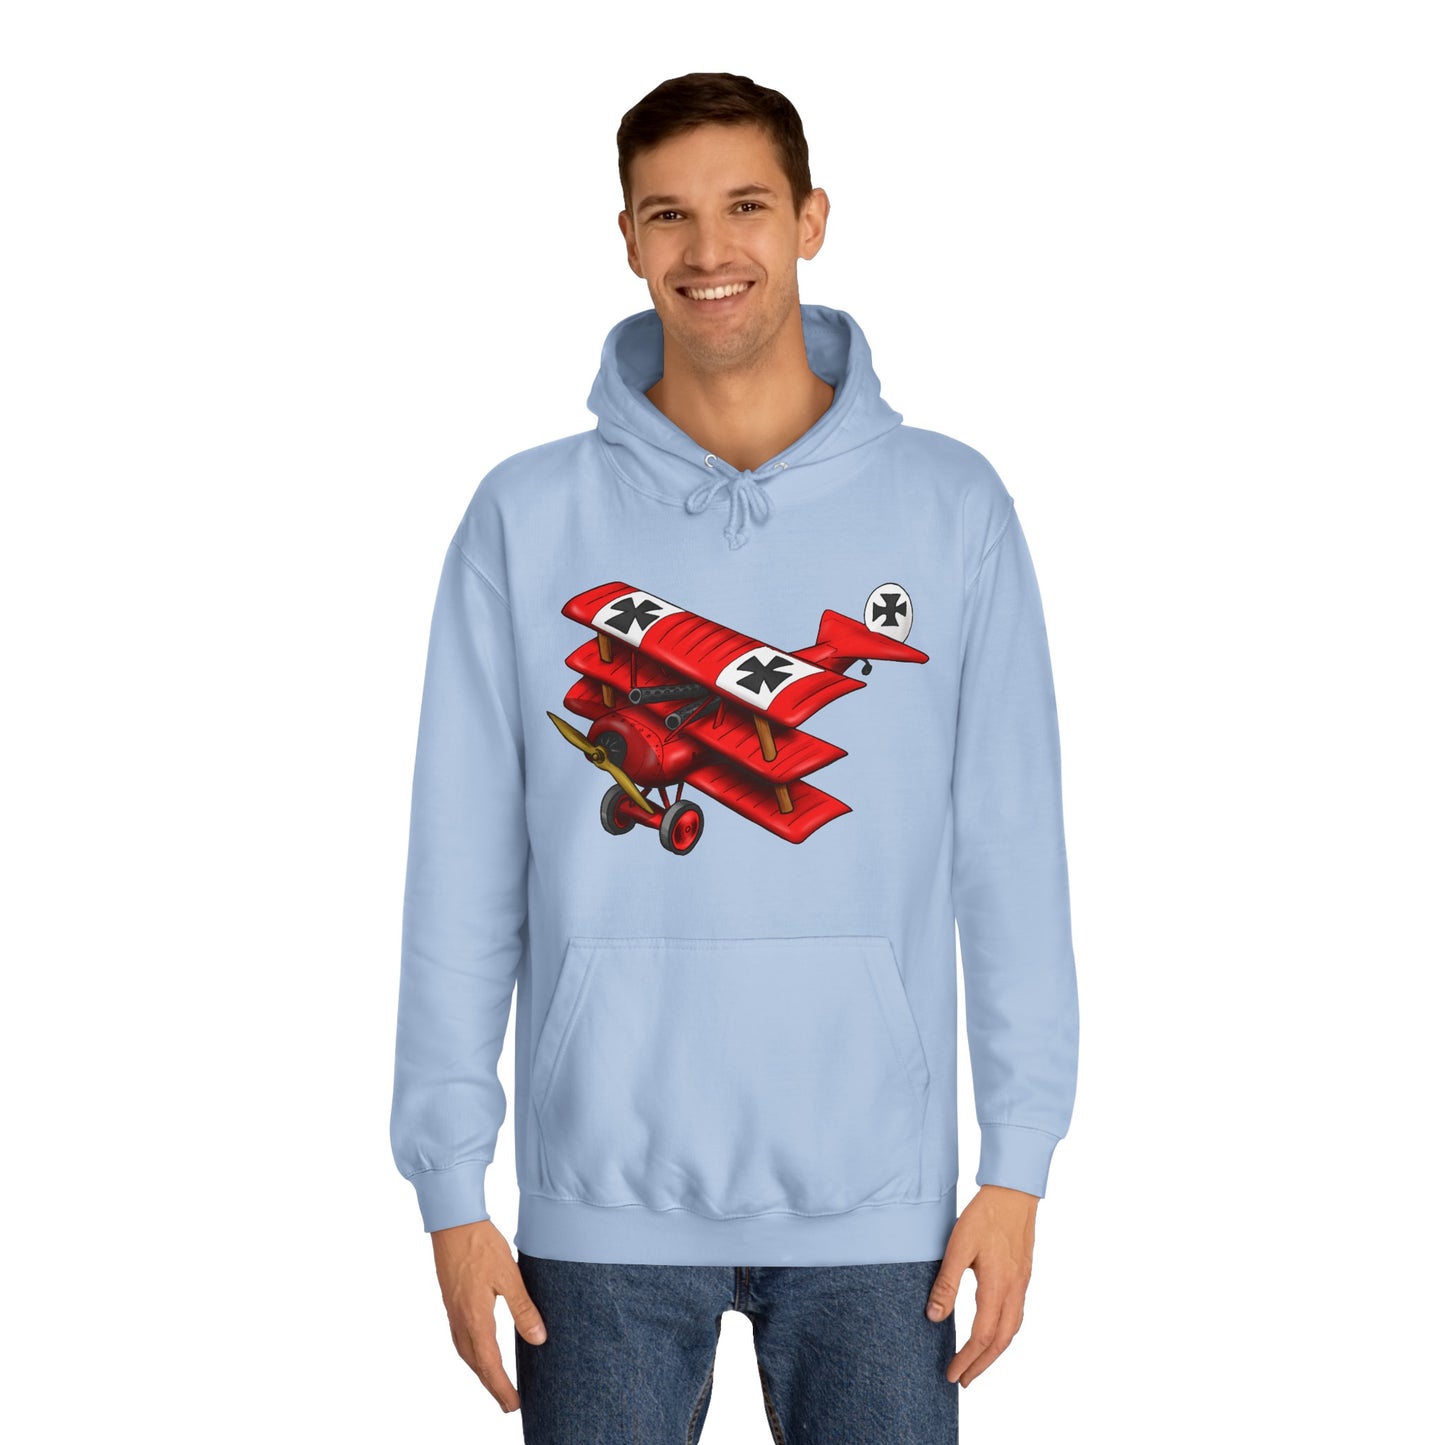 Red Baron Aircraft Design Unisex College Hoodie